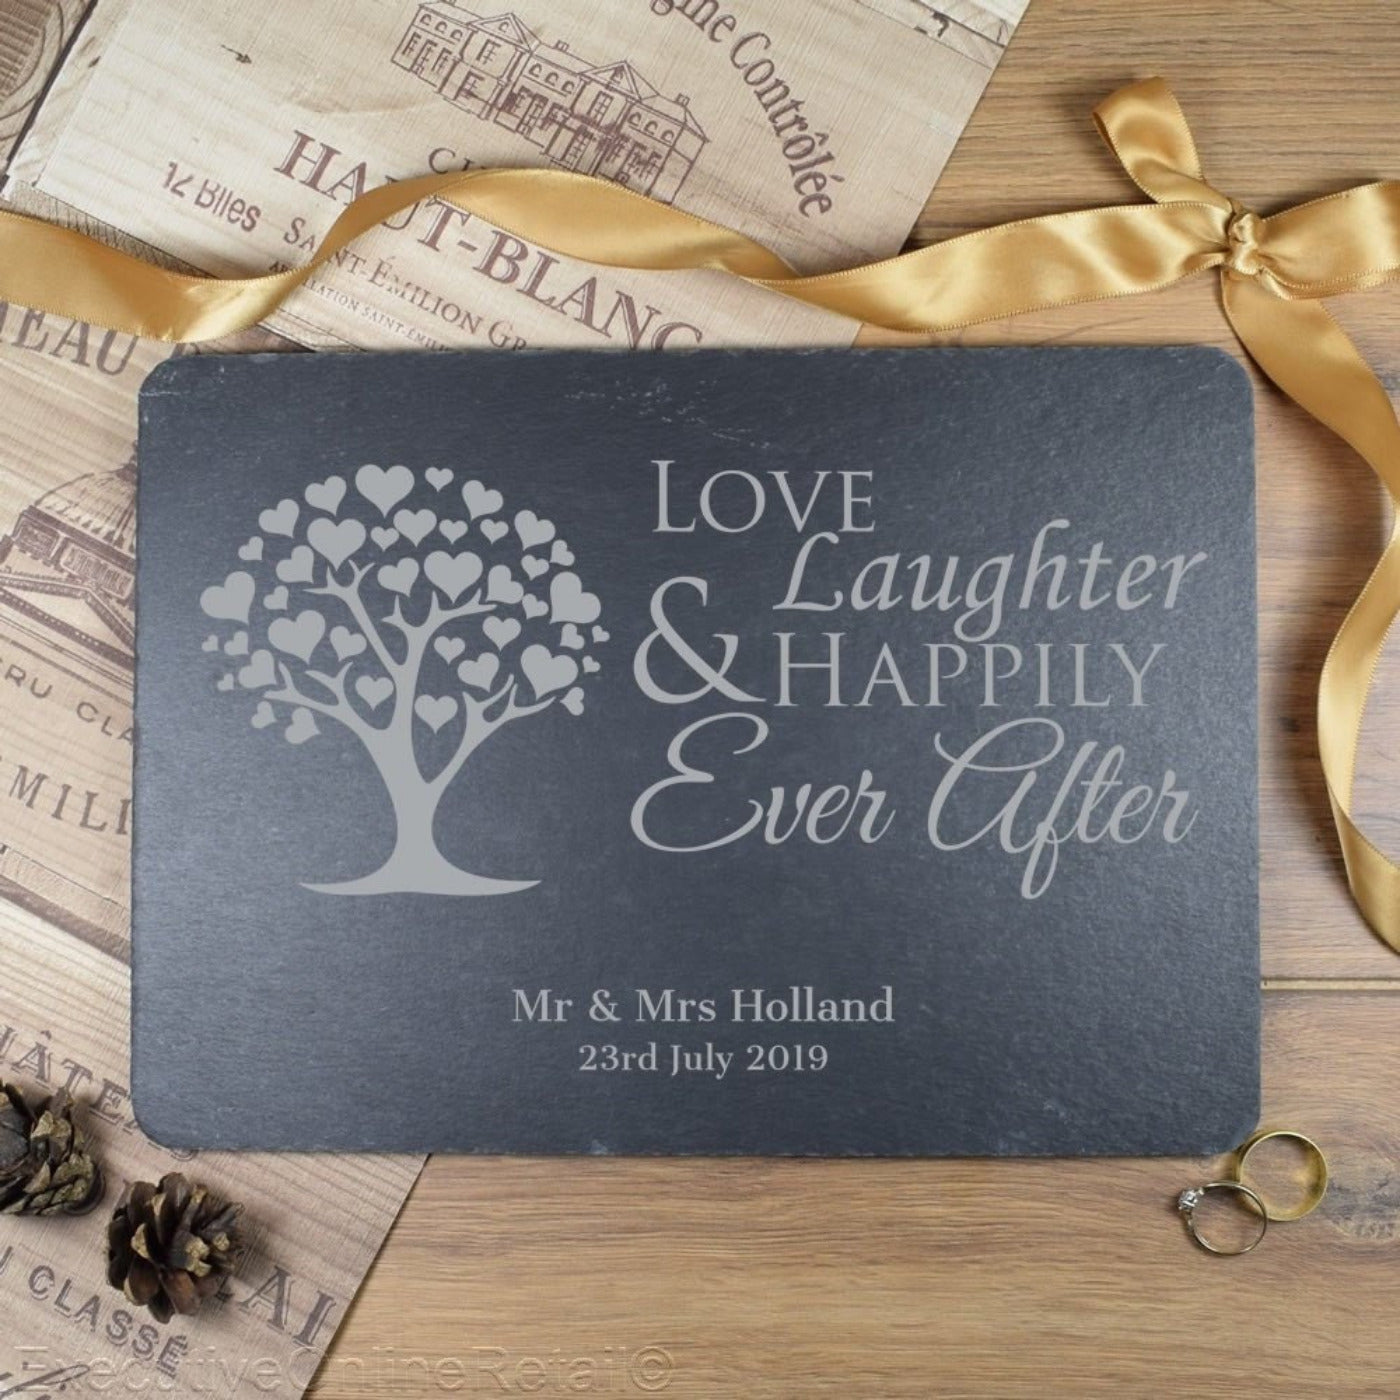 Wedding Gift - Personalised Engraved Slate Placemat New Home Gift, Happily Ever After, Platter, Cheeseboard, Valentines Gift, Mothers Day